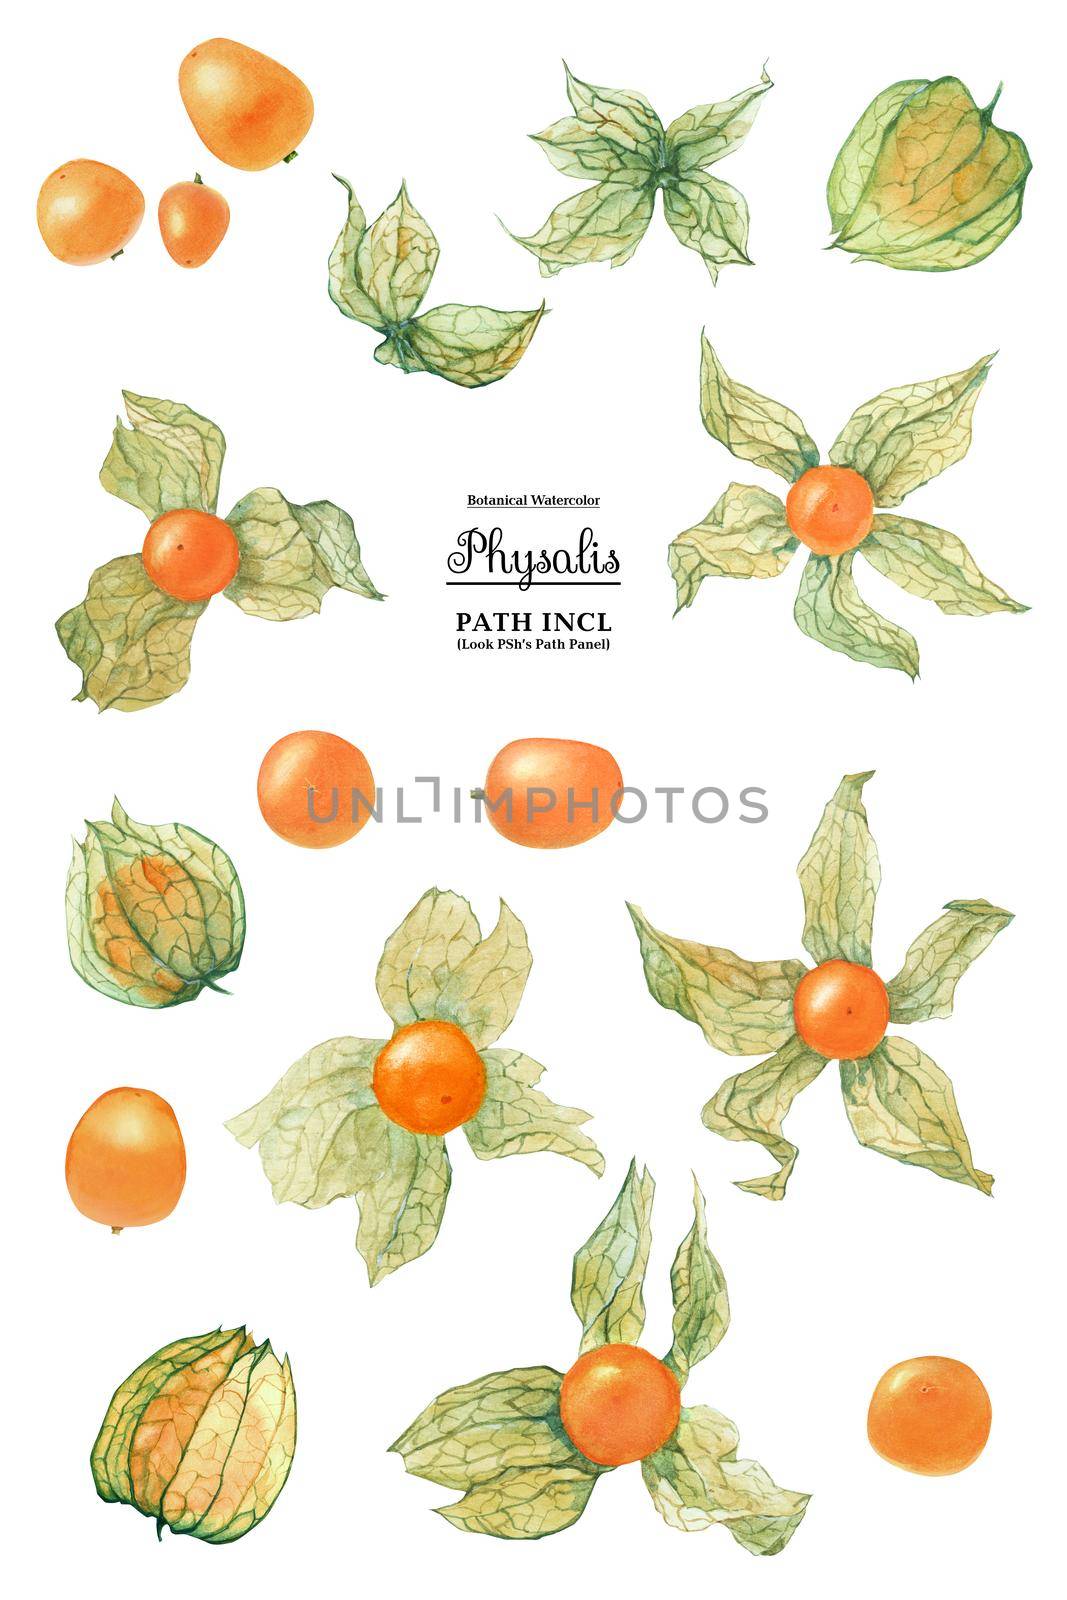 Botanical Watercolor Physalis by Xeniasnowstorm